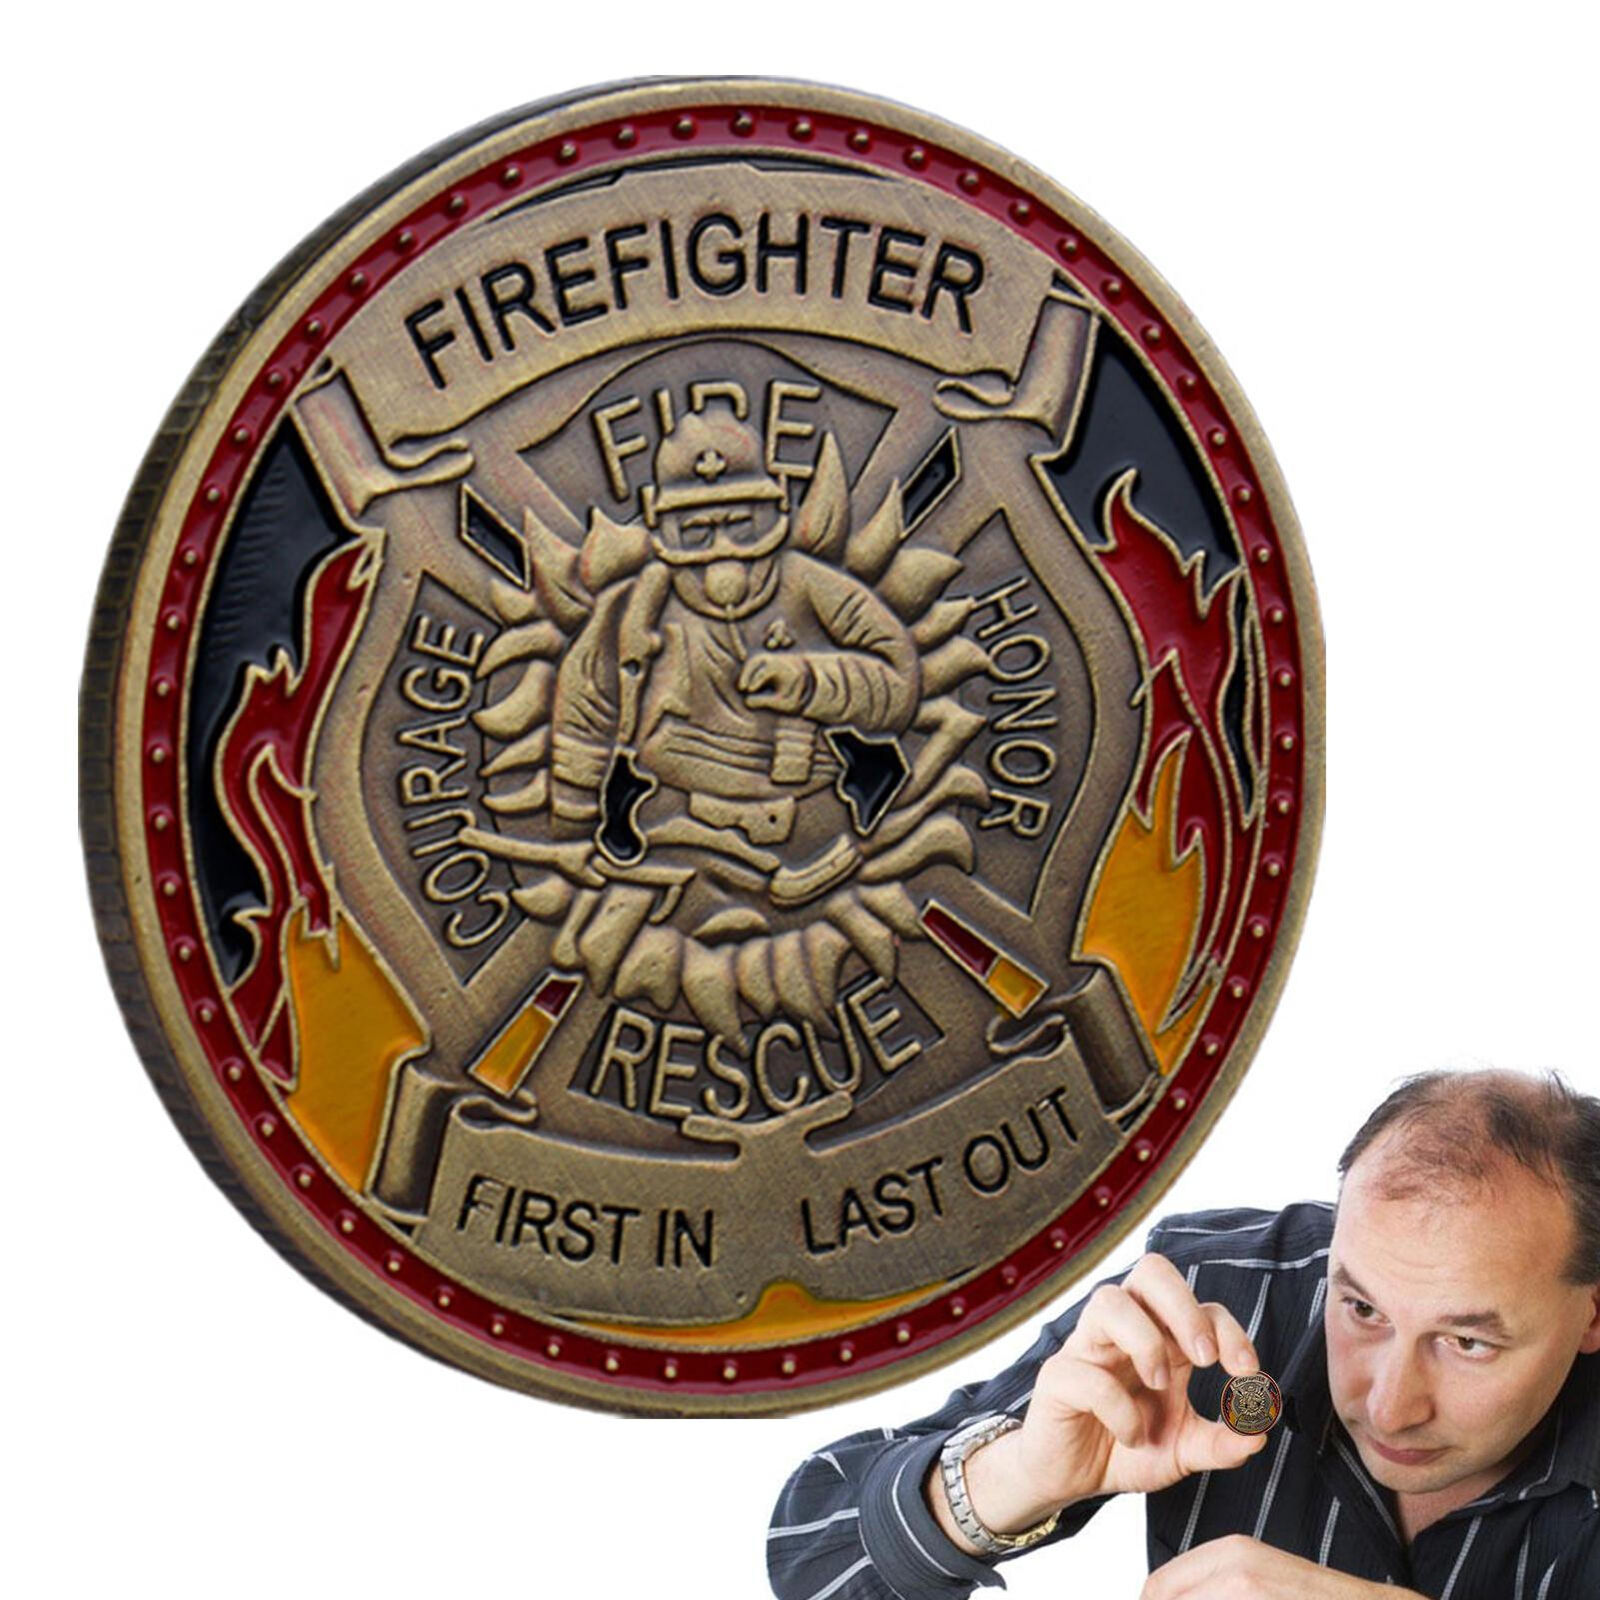 Firefighter Challenge Coin Fire Department Rescue Prayer Coin